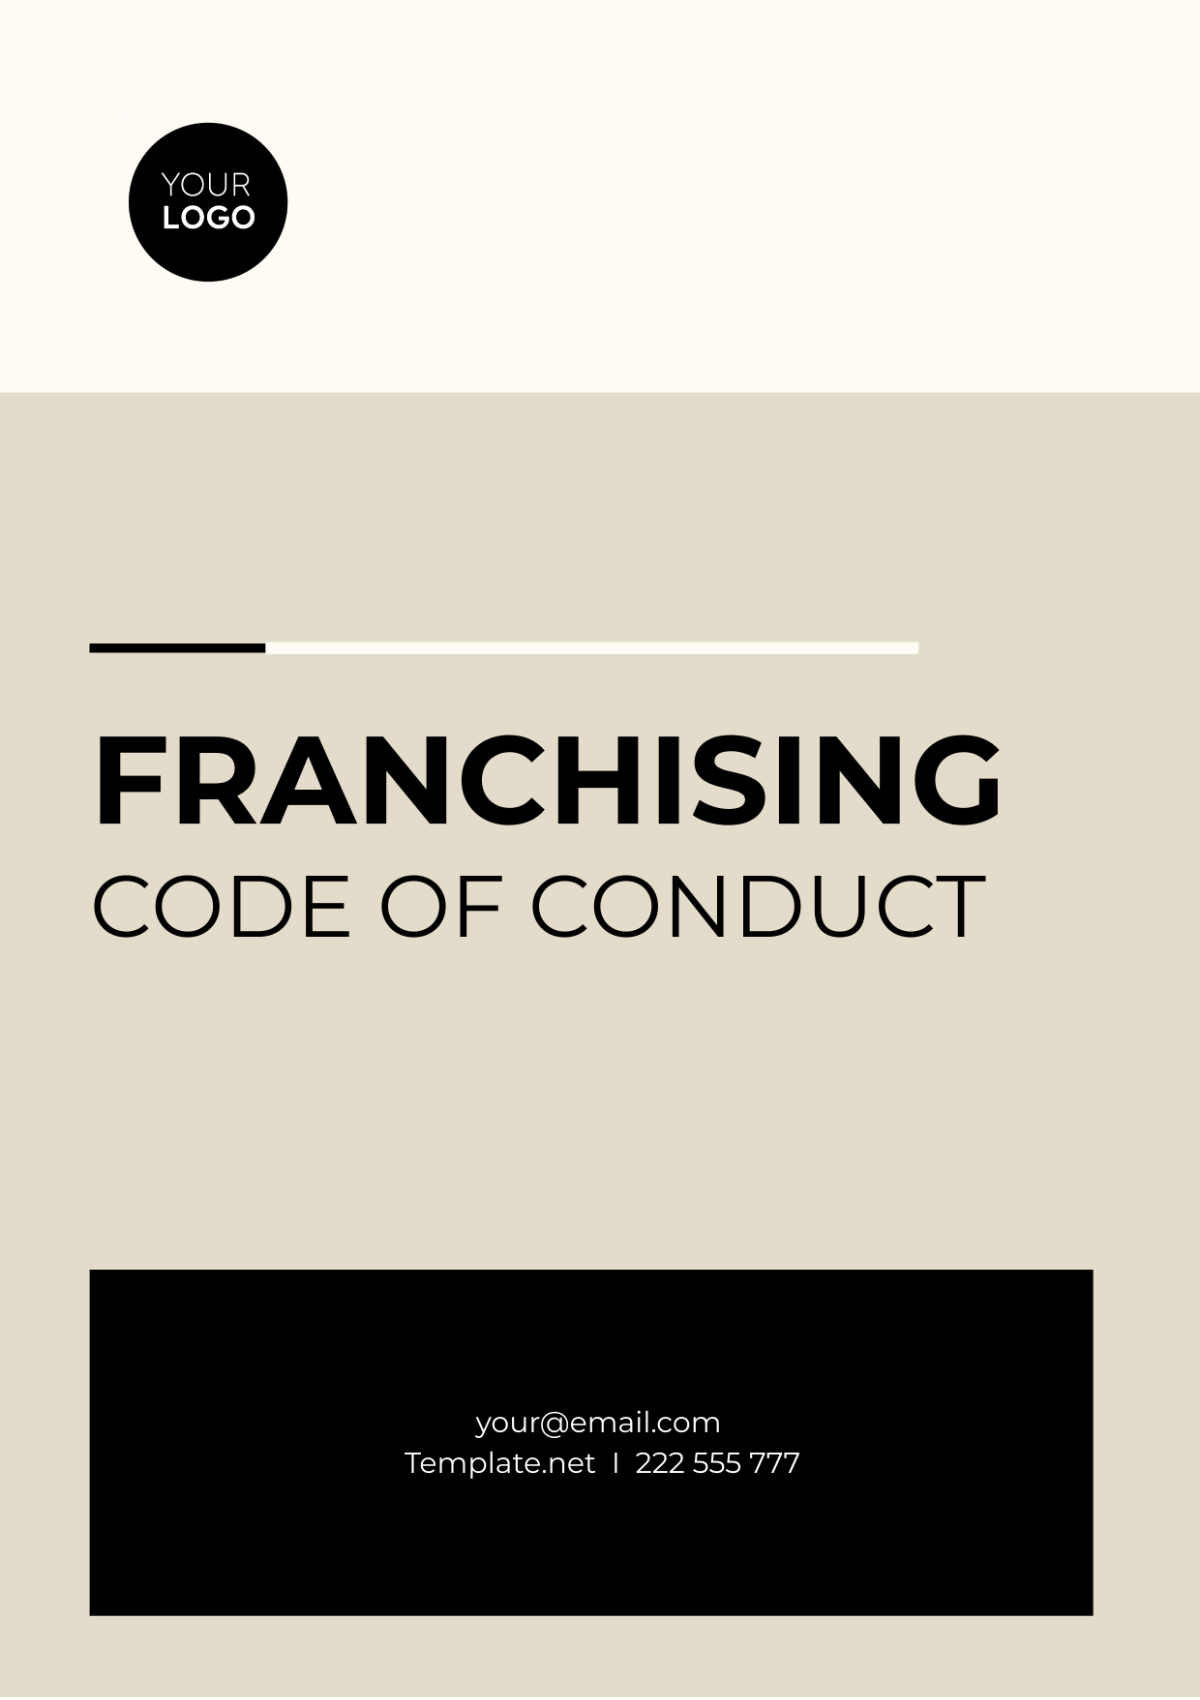 Franchising Code of Conduct Template